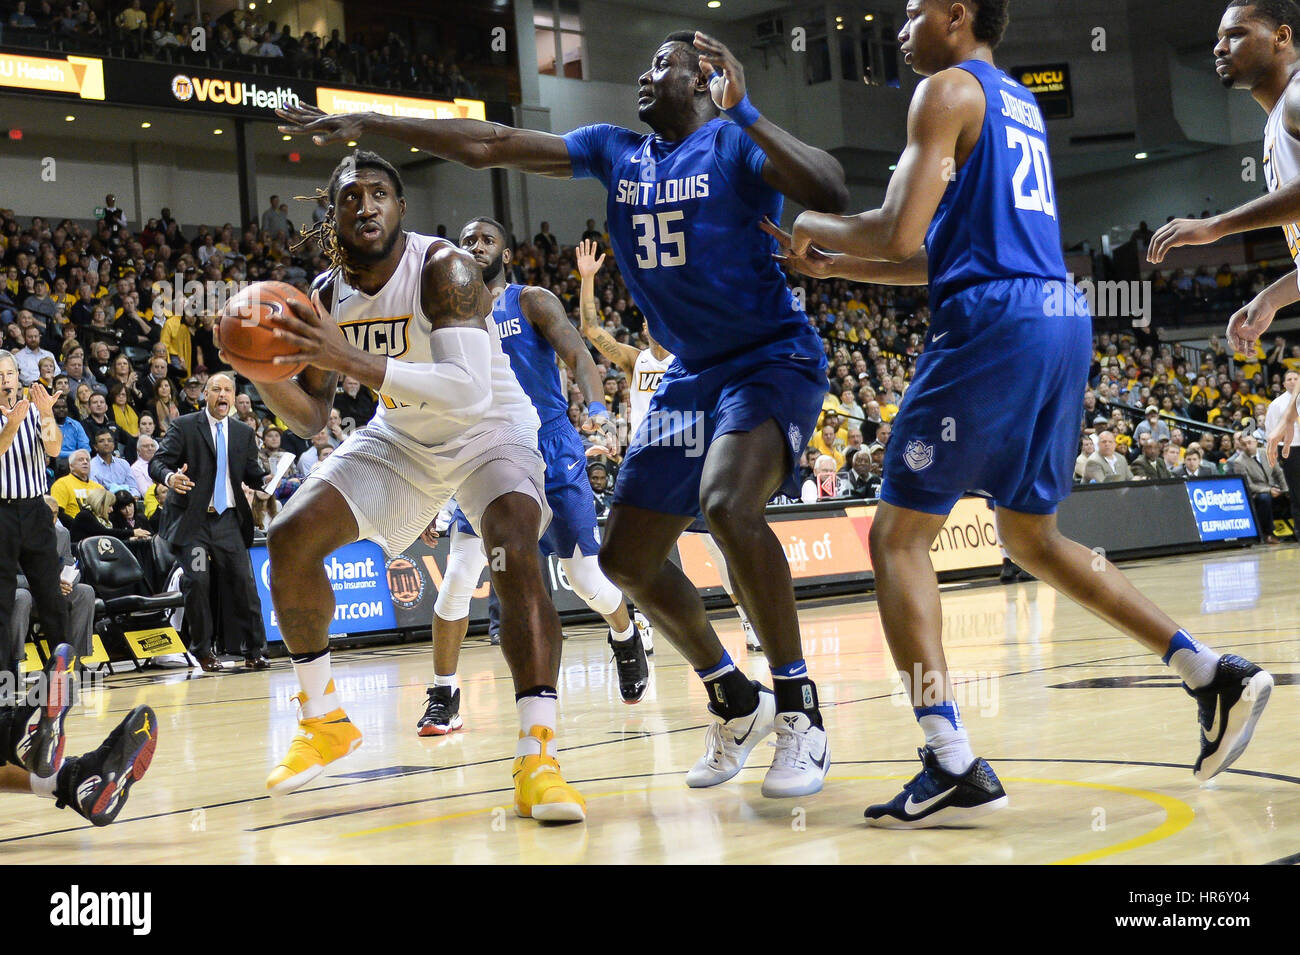 February 22, 2017 - MO ALIE-COX (12) ducks under REGGIE AGBEKO (35) as he drives to the basket during the first half of the game held at E.J. Wade Arena at the Stuart C. Siegel Center, Richmond, Virginia. Credit: Amy Sanderson/ZUMA Wire/Alamy Live News Stock Photo